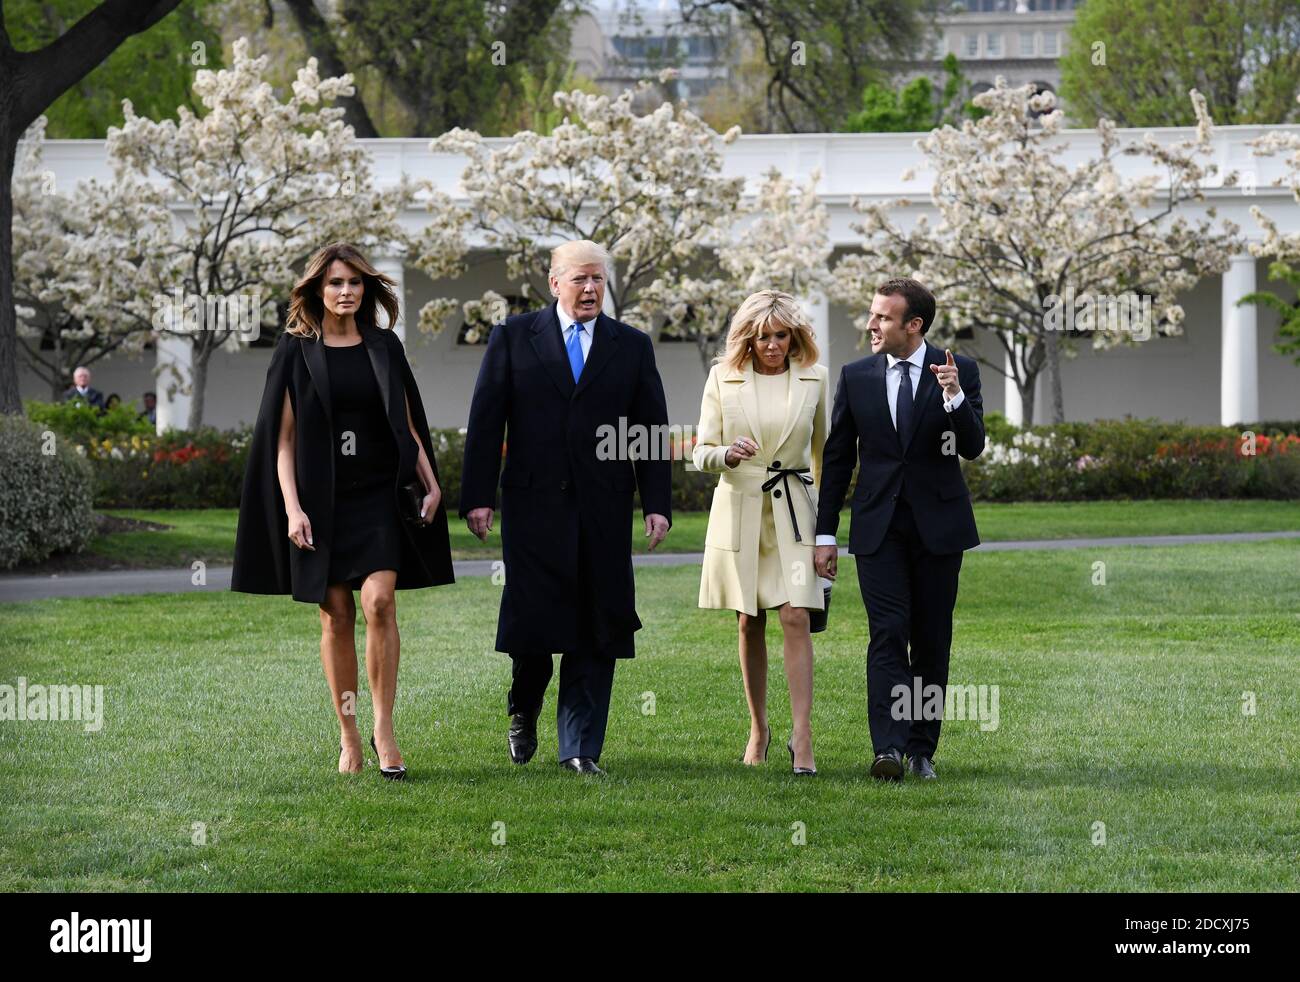 U.S President Donald Trump and First Lady Melania Trump walk with French President Emmanuel Macron and his wife Brigitte Macron on the South Lawn of the White House April 23, 2018 in Washington D.C . Photo by Olivier Douliery/ABACAPPRESS.COM Stock Photo